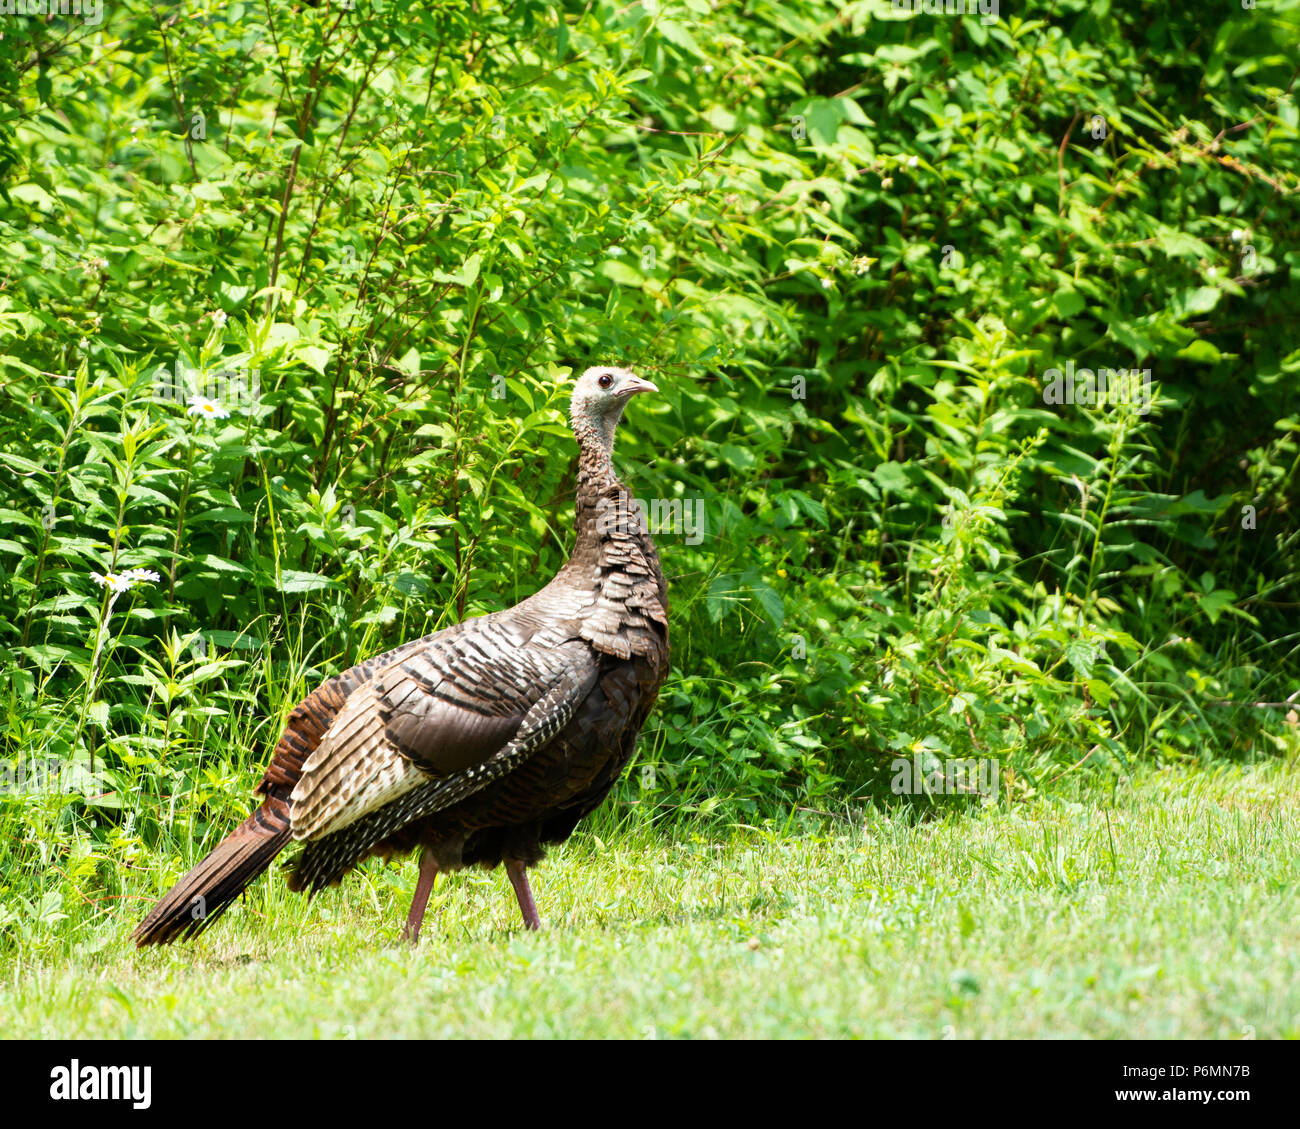 Alert wild eastern turkey hen (Meleagris gallopavo) standing in a field on the edge of the Adirondack Mountains, NY USA wilderness.. Stock Photo